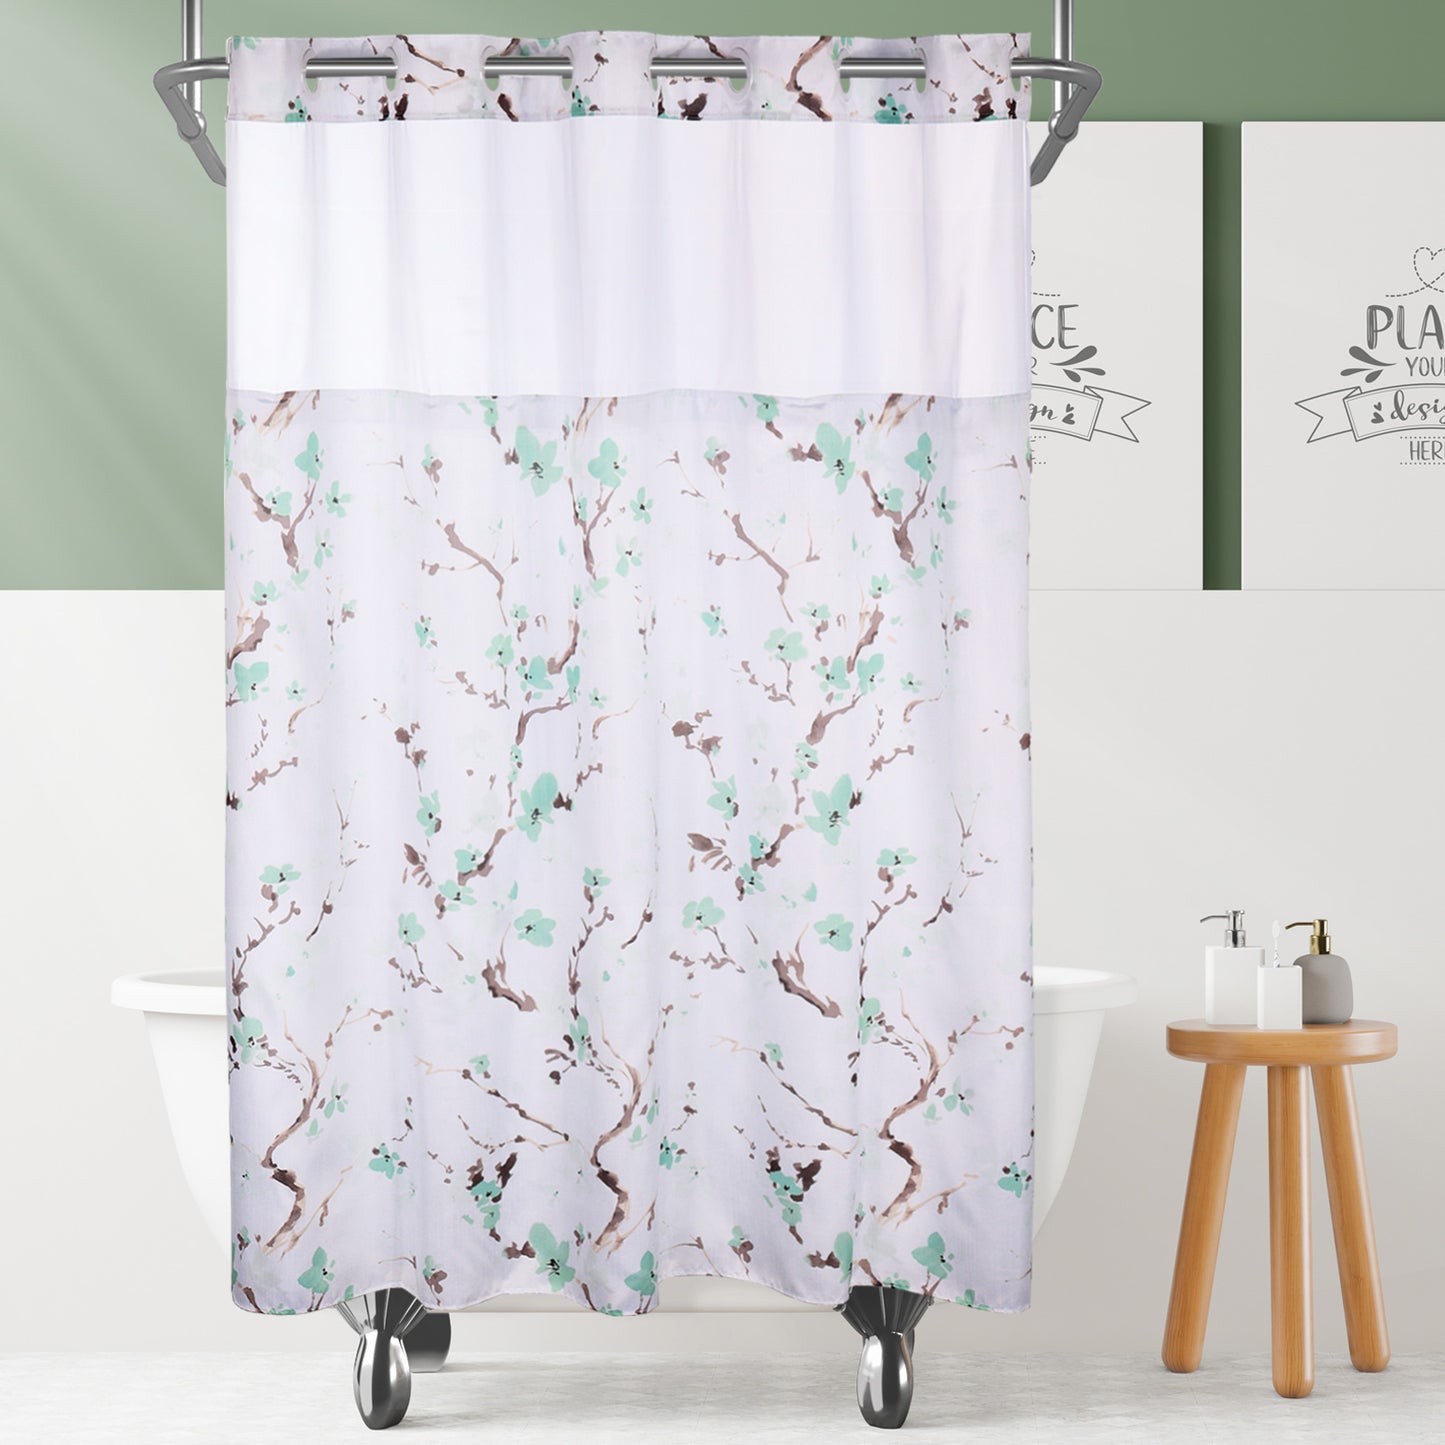 Lagute SnapHook Hook Free Shower Curtain with Snap-in Liner , 71Wx74L, Green Blossom